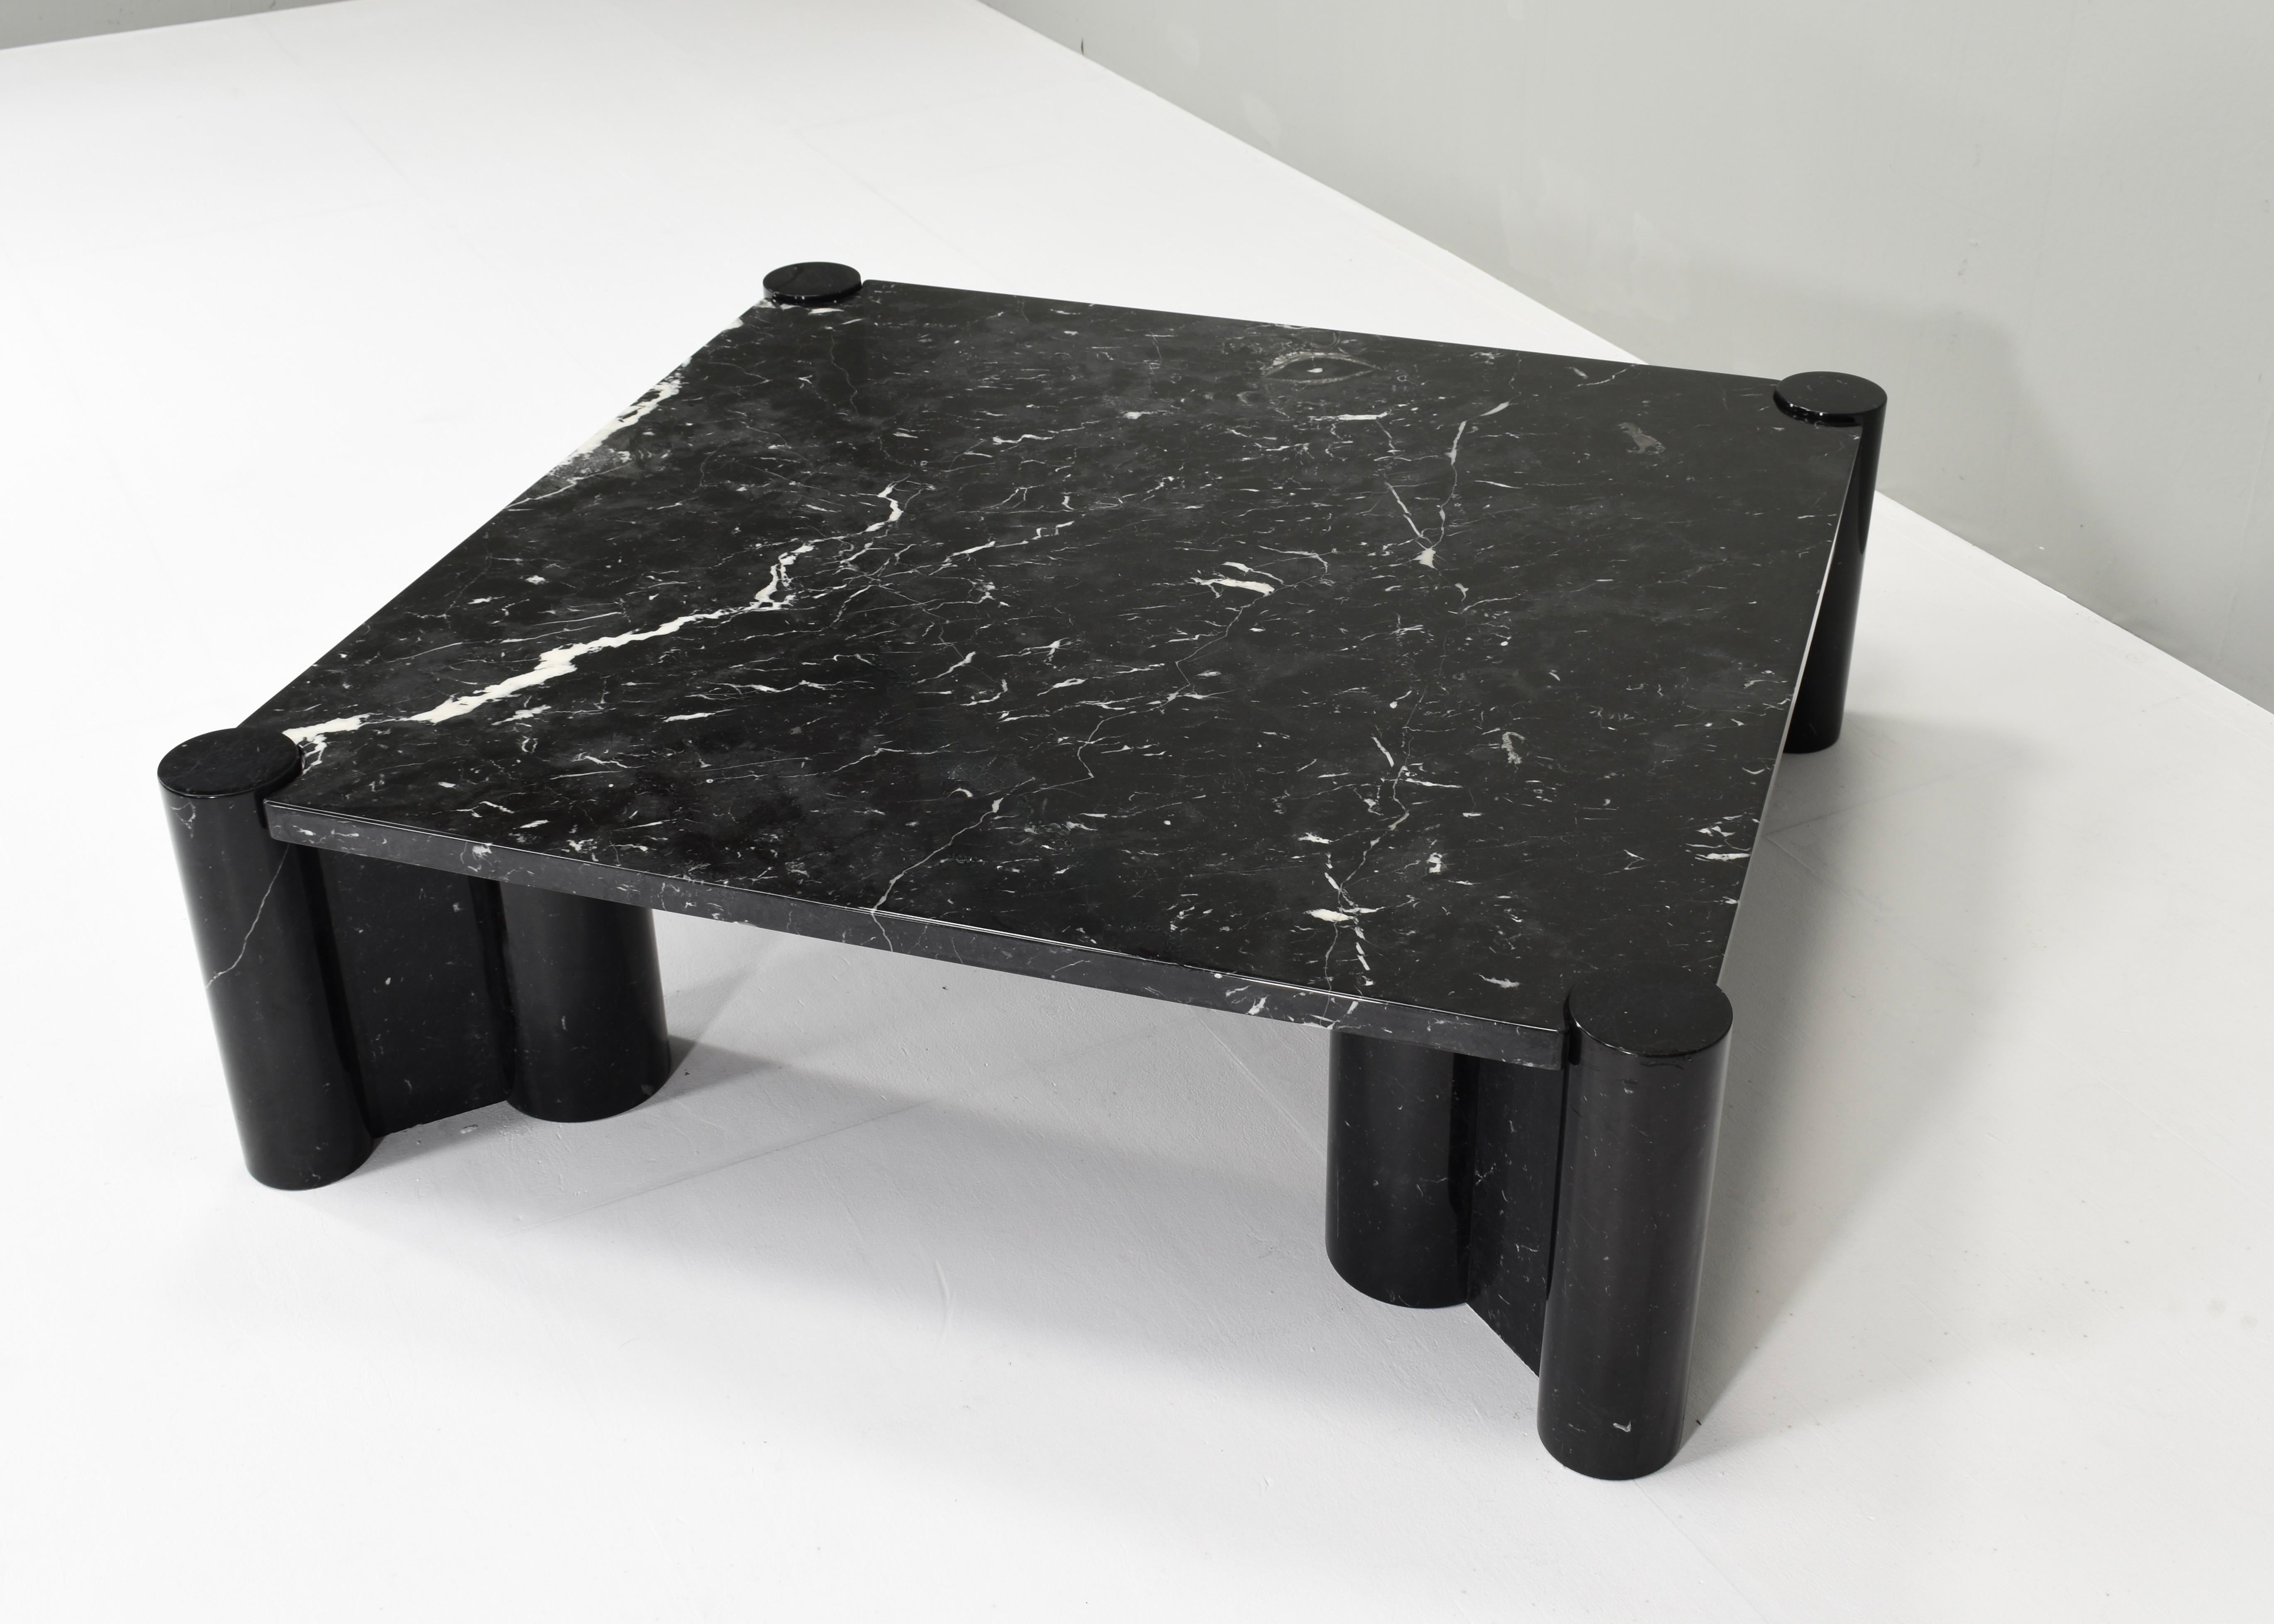 Gae Aulenti for Knoll ‘Jumbo’ Coffee Table in Nero Marquina Black Marble, Italy  1